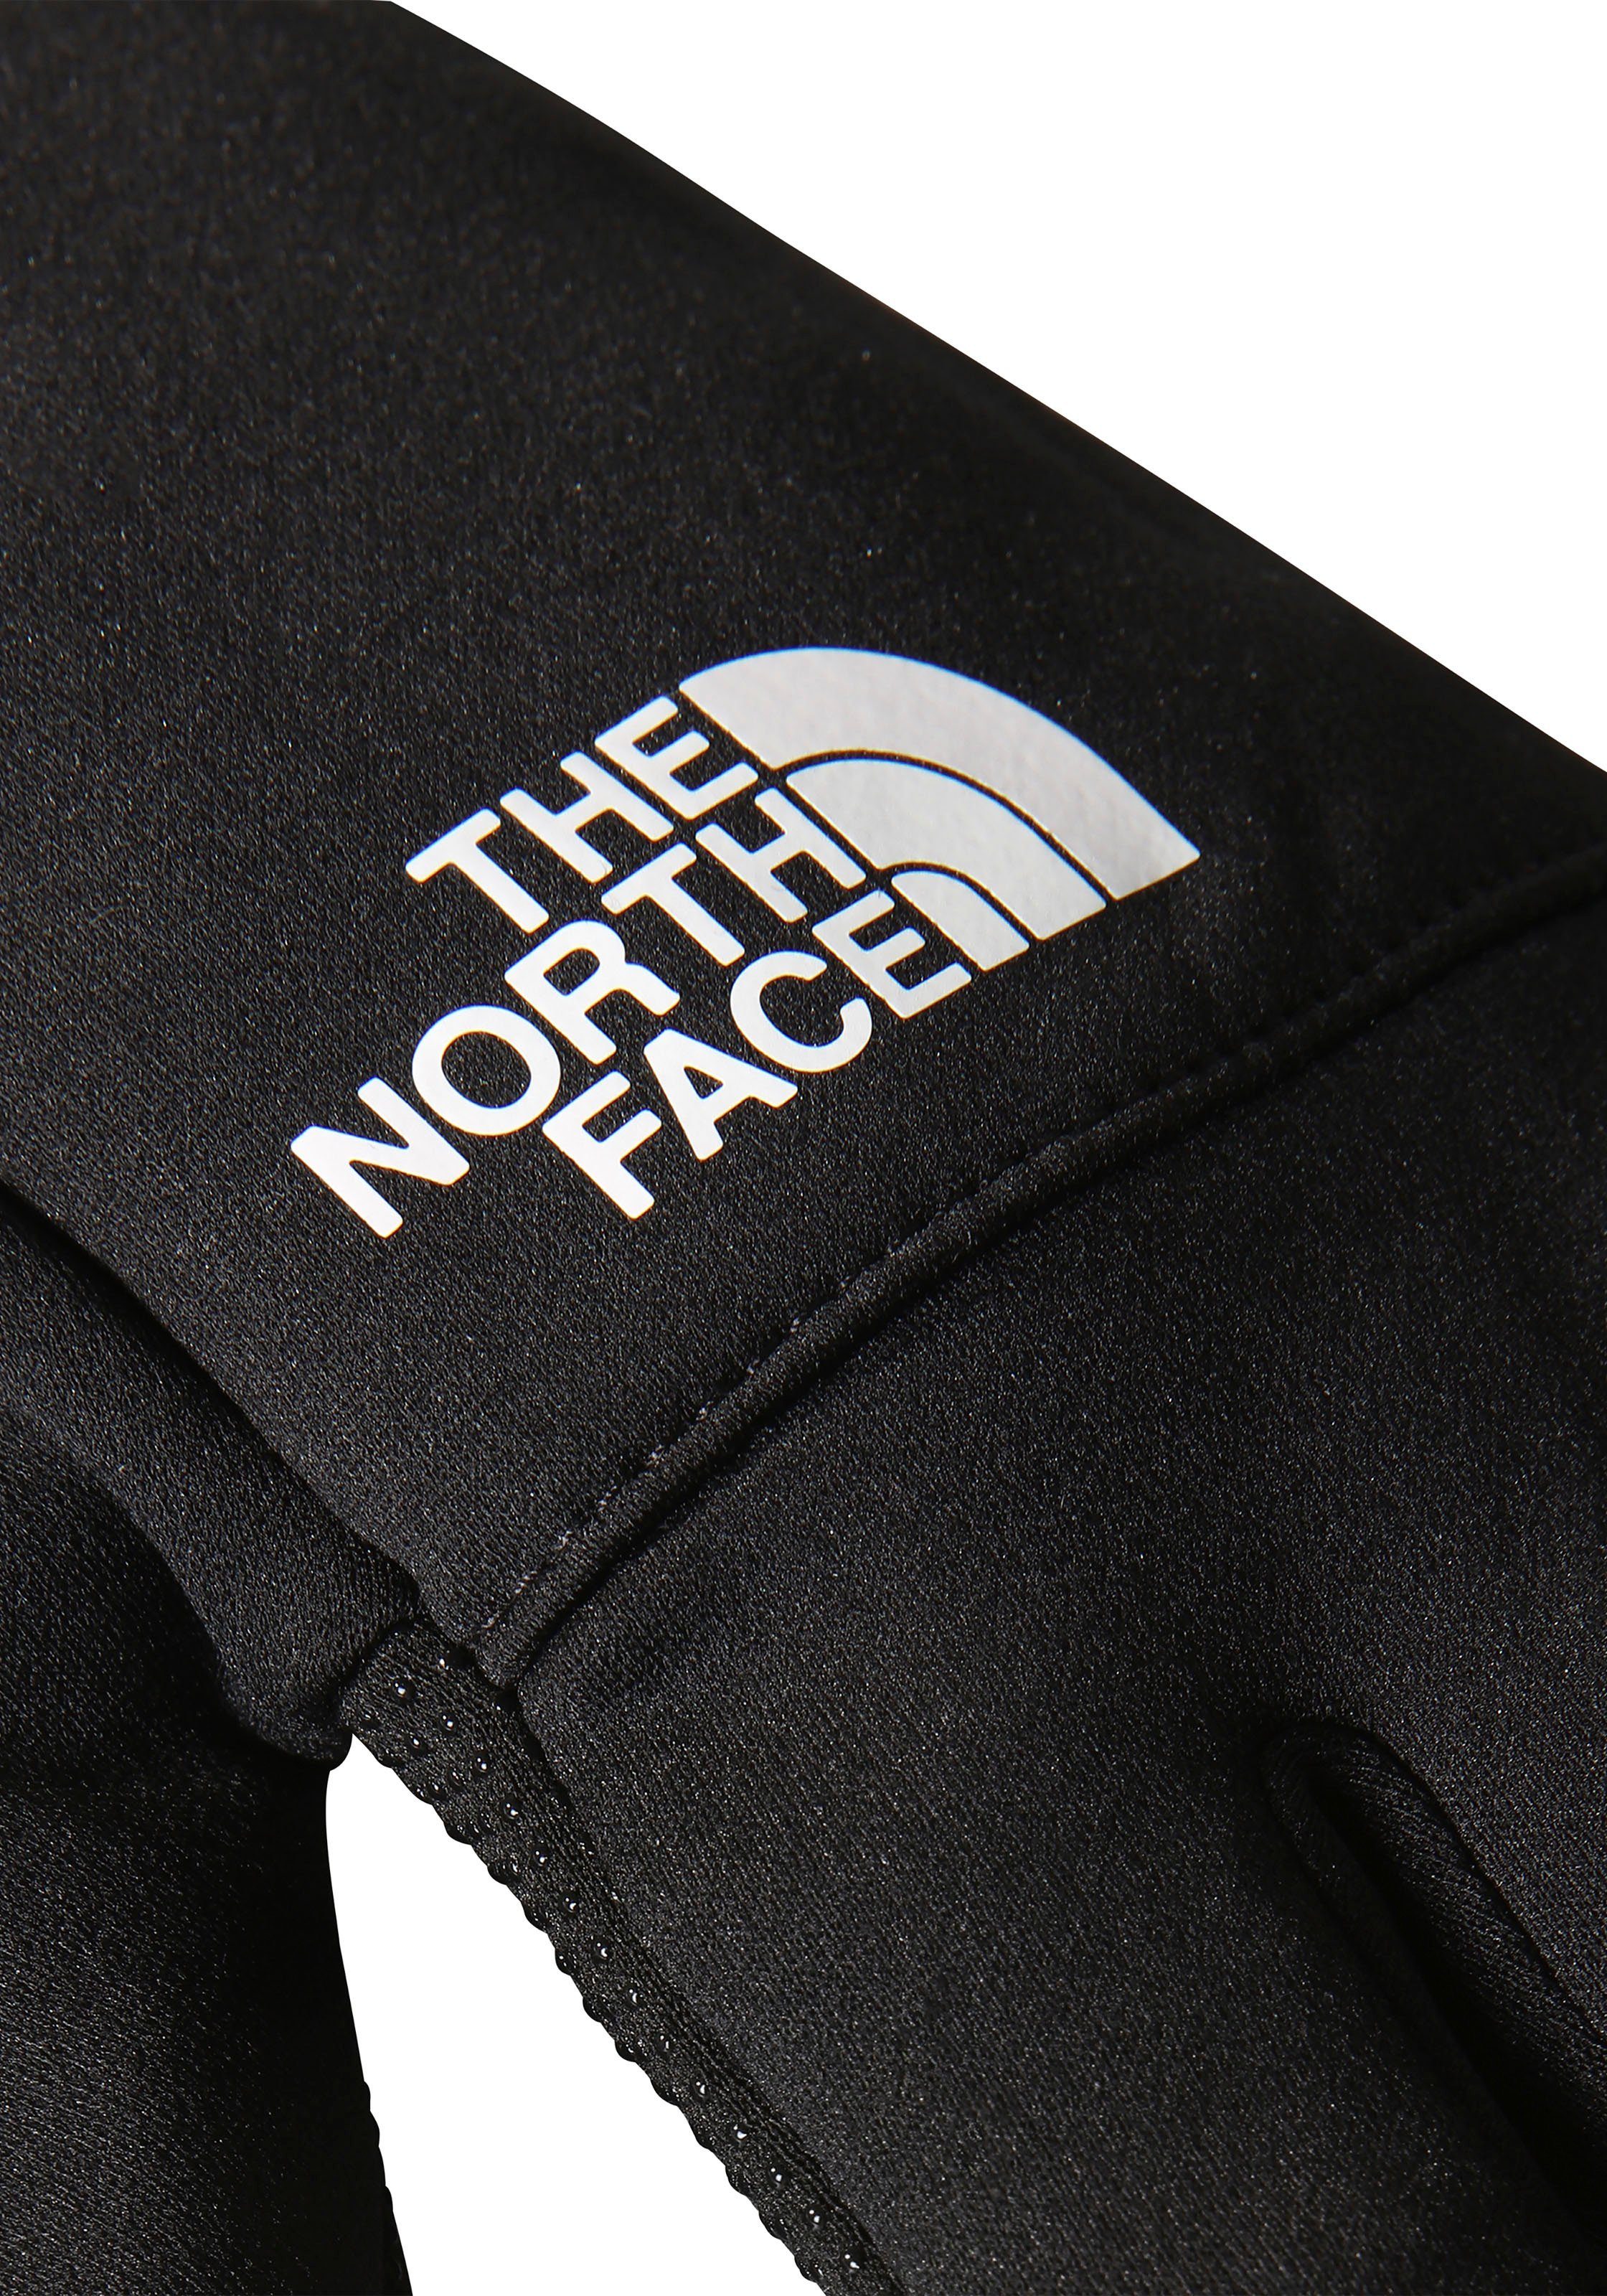 ETIP Multisporthandschuhe The North Face